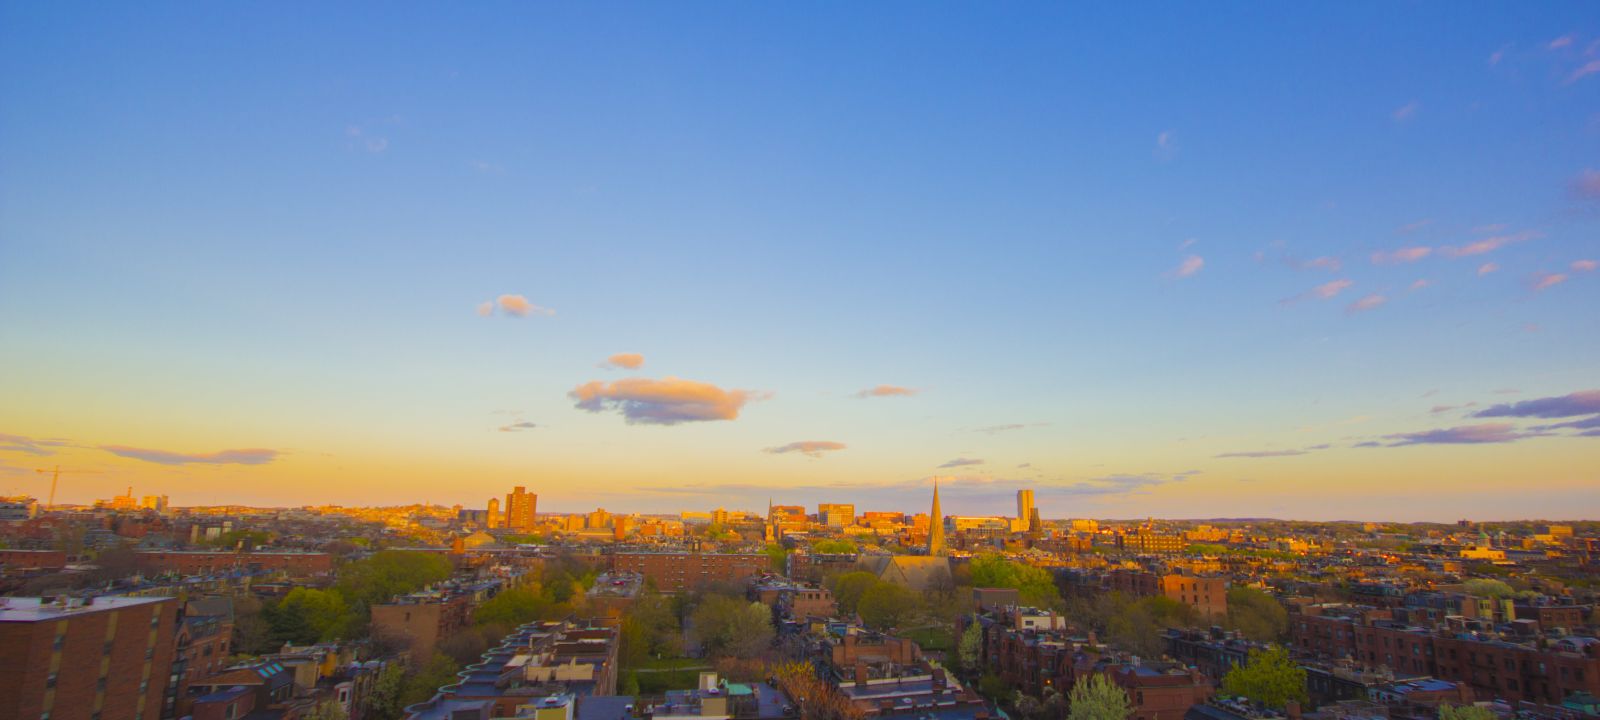 Rooftop Bar view of city dusk in Boston, Massachusetts, from The Colonnade Hotel